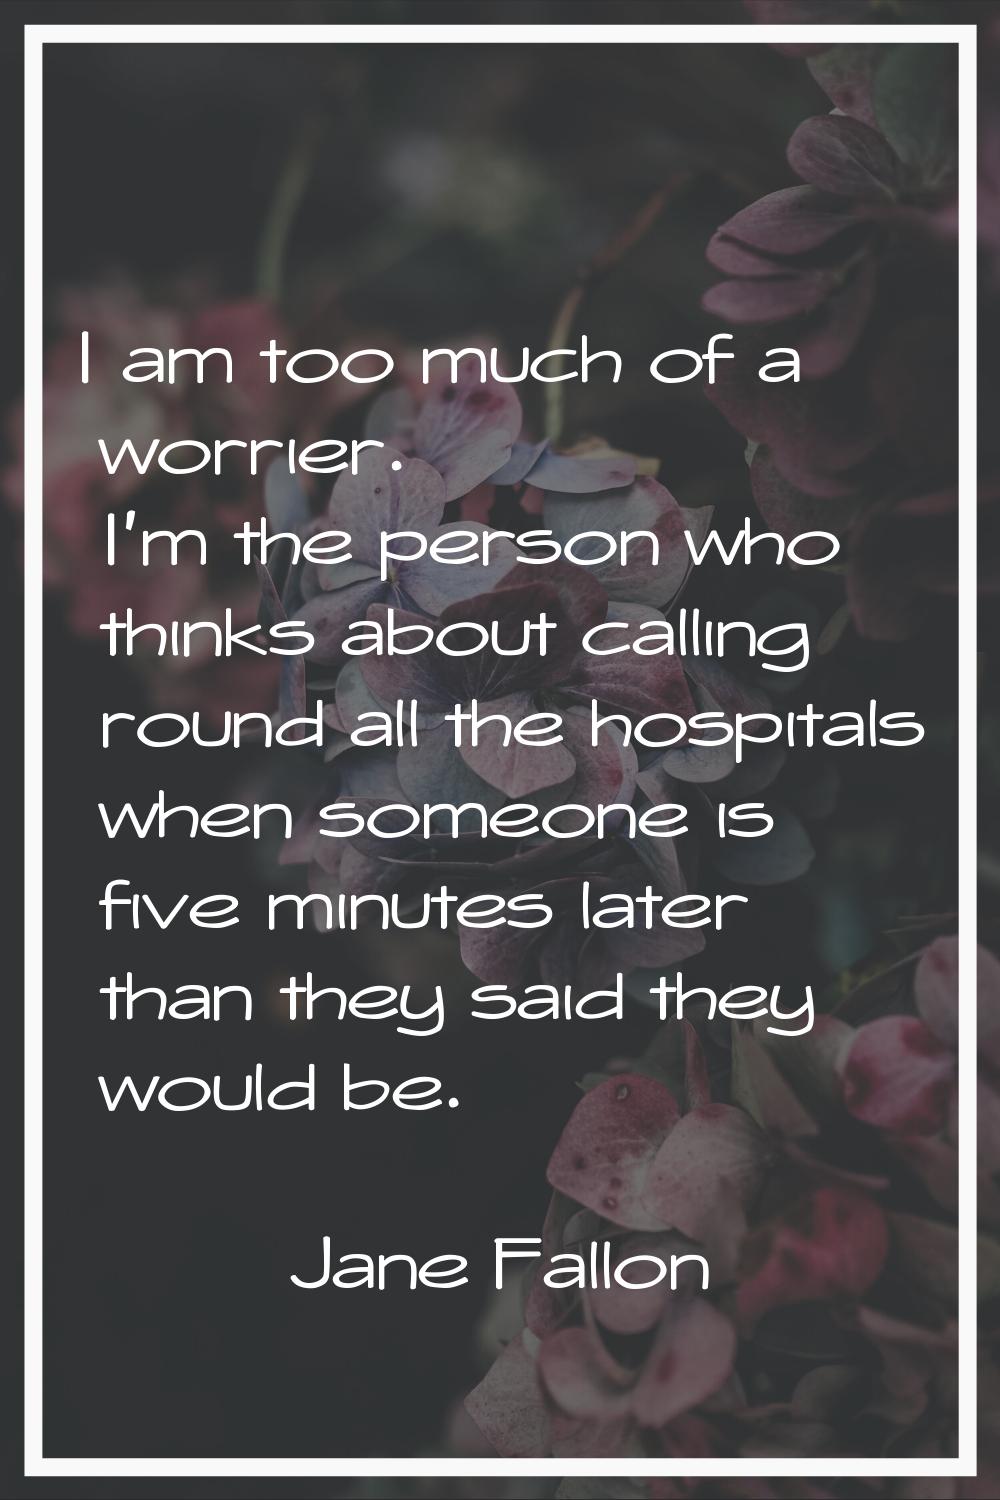 I am too much of a worrier. I'm the person who thinks about calling round all the hospitals when so